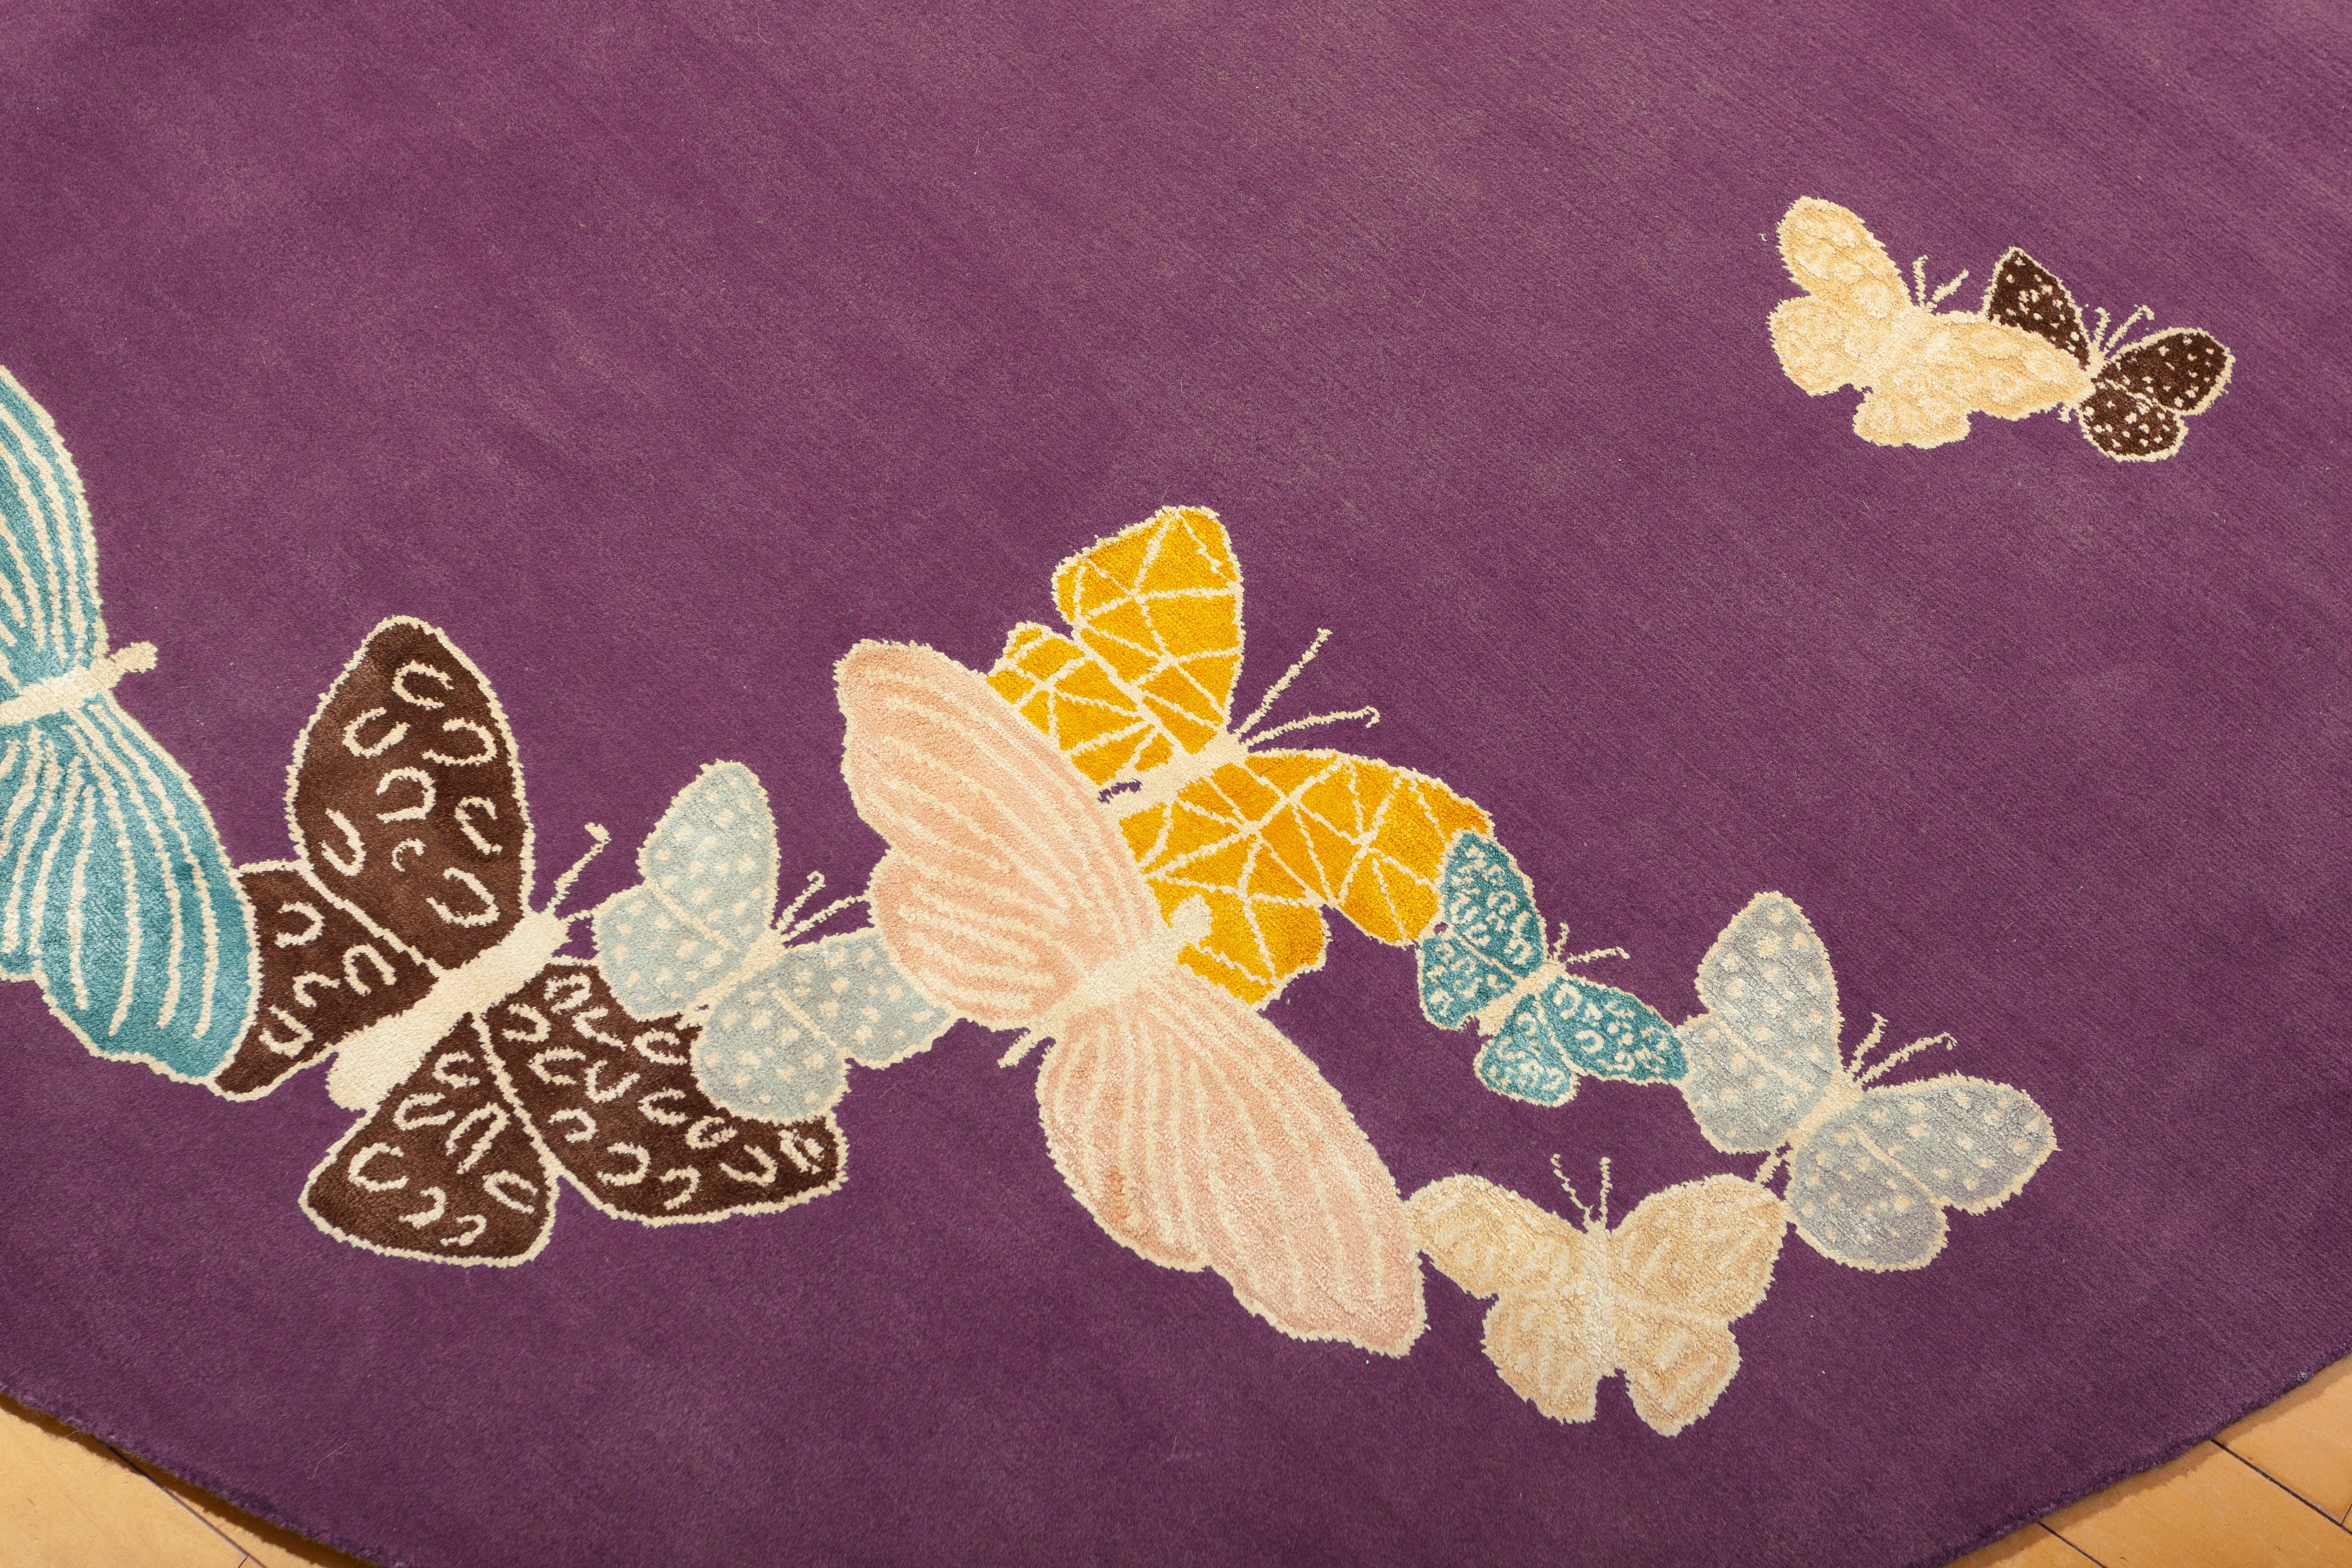 Sergio Mannino Studio's collection of rugs is expanded with new designs. (See storefront to look at other items).
Hand-drawn butterflies seem to come out of the floor. The background is wool, while the butterflies are made with a silk